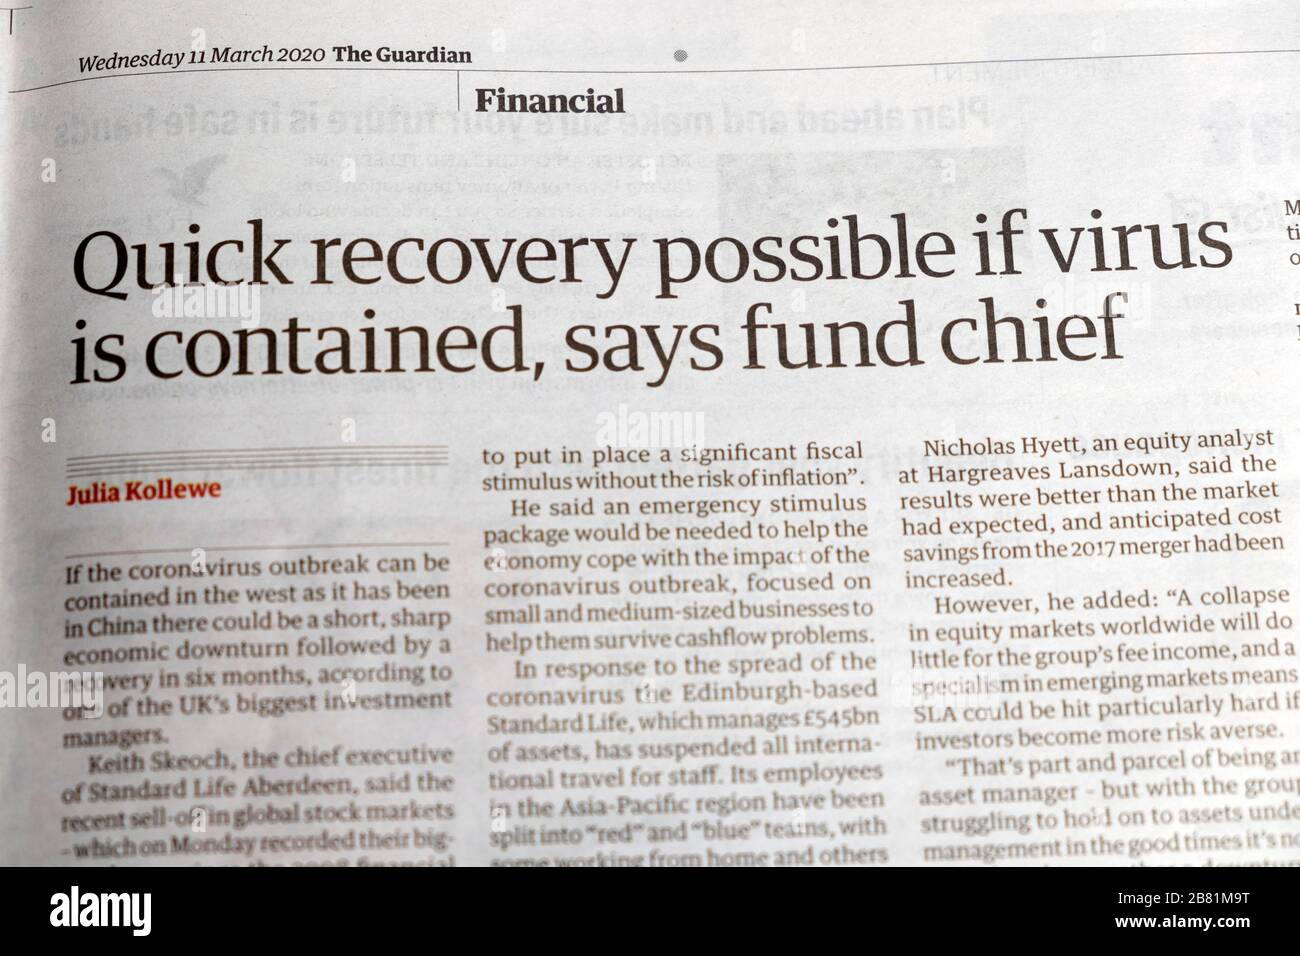 Quick Recovery Possible If Virus Is Contained Says Fund Chief 11 March Financial Section Covid 19 Article Inside Guardian Newspaper London Uk Stock Photo Alamy